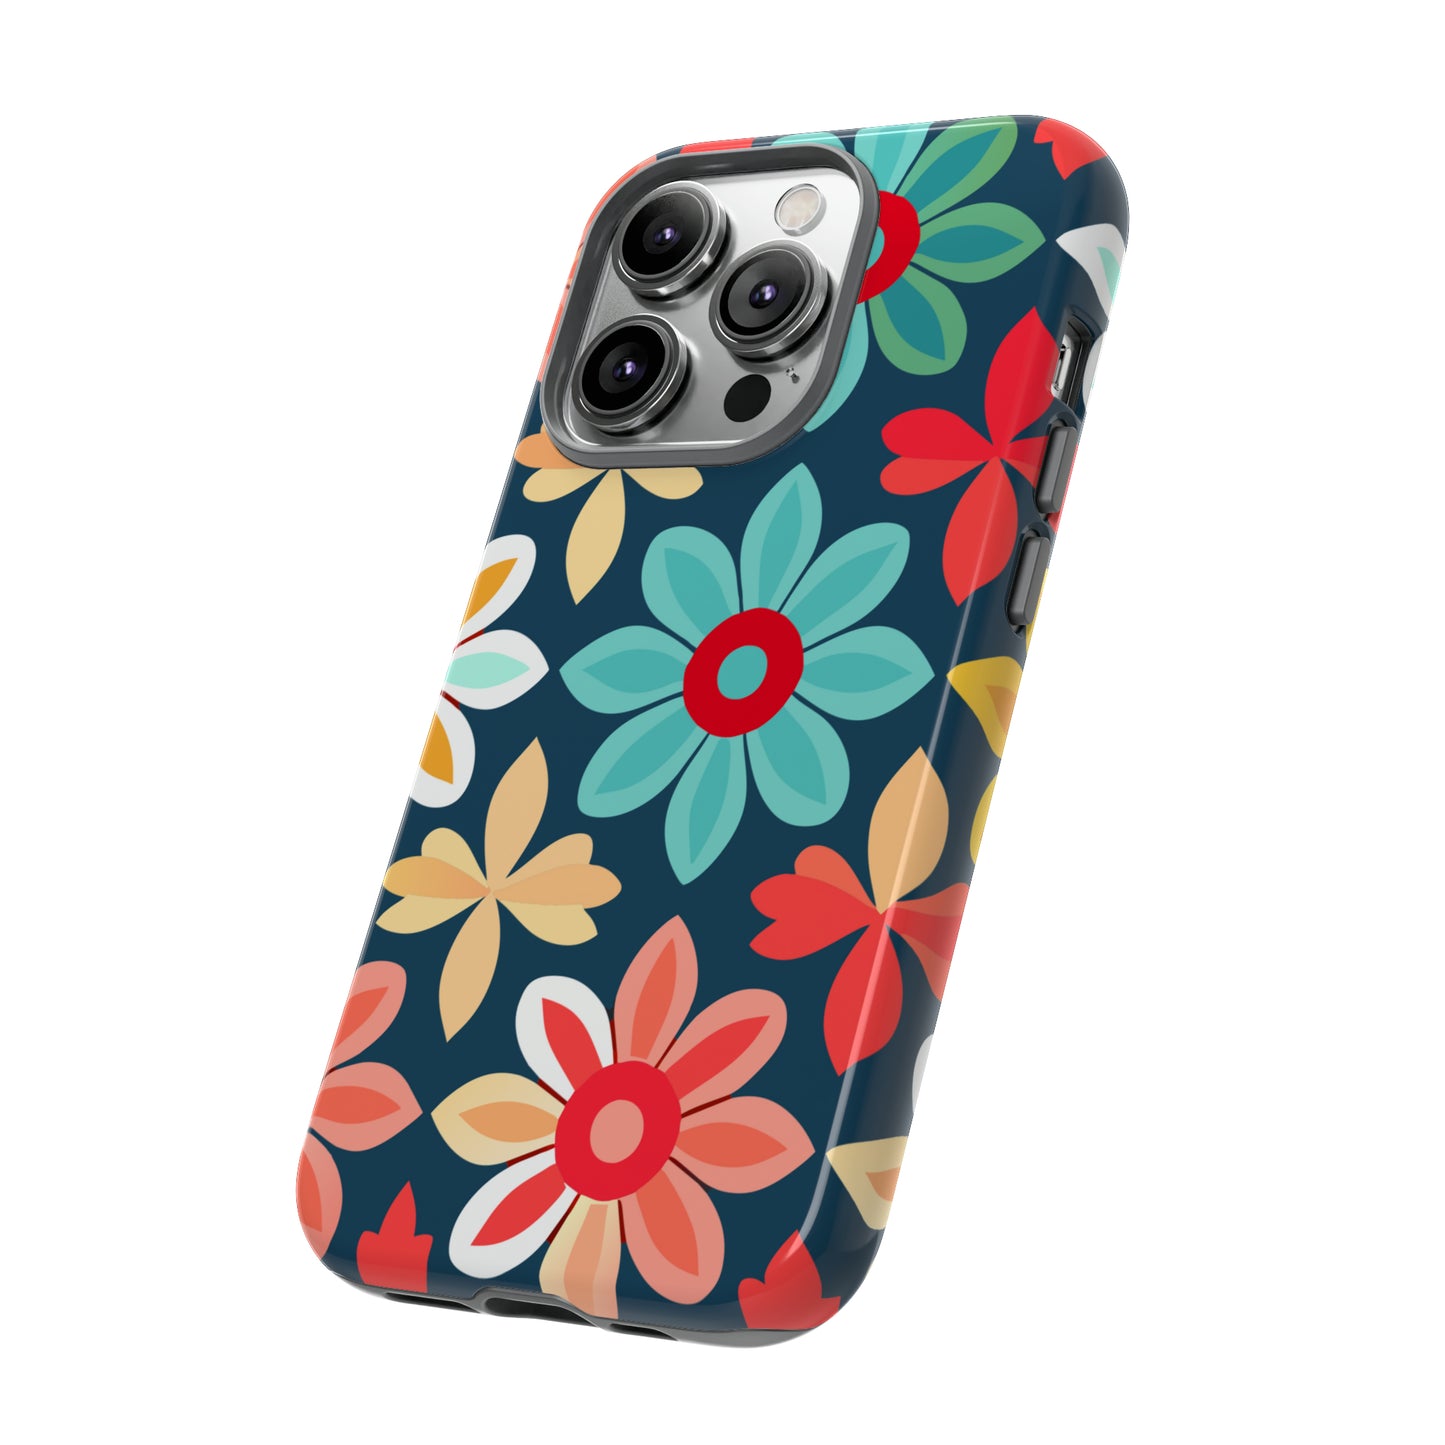 Colorful Floral IPhone Tough Cases, IPhone Case, Case for Phone, Phone Cover, Gifts For Her, IPhone Protective Case, Colorful IPhone Case